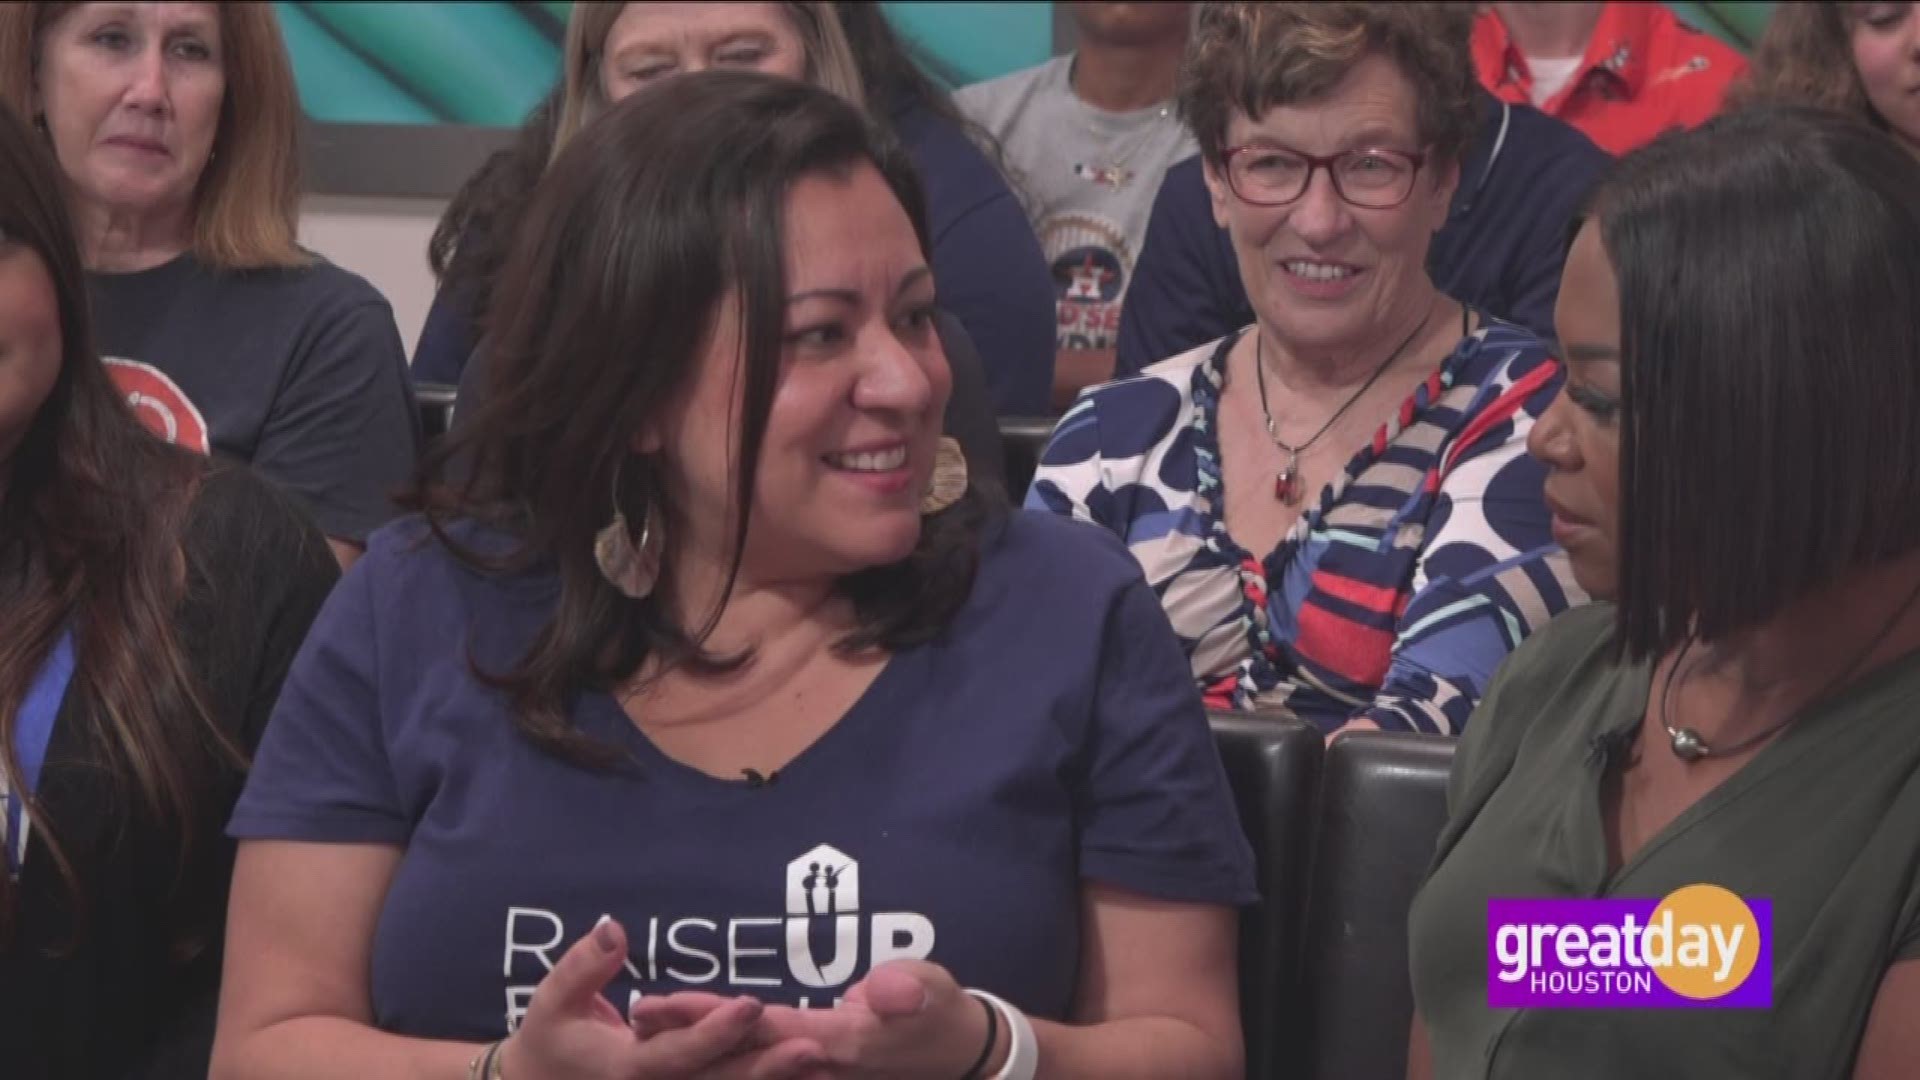 Christina Yaya, Executive Director of Raise Up Families, chats with Deborah Duncan about the organization and upcoming fundraiser